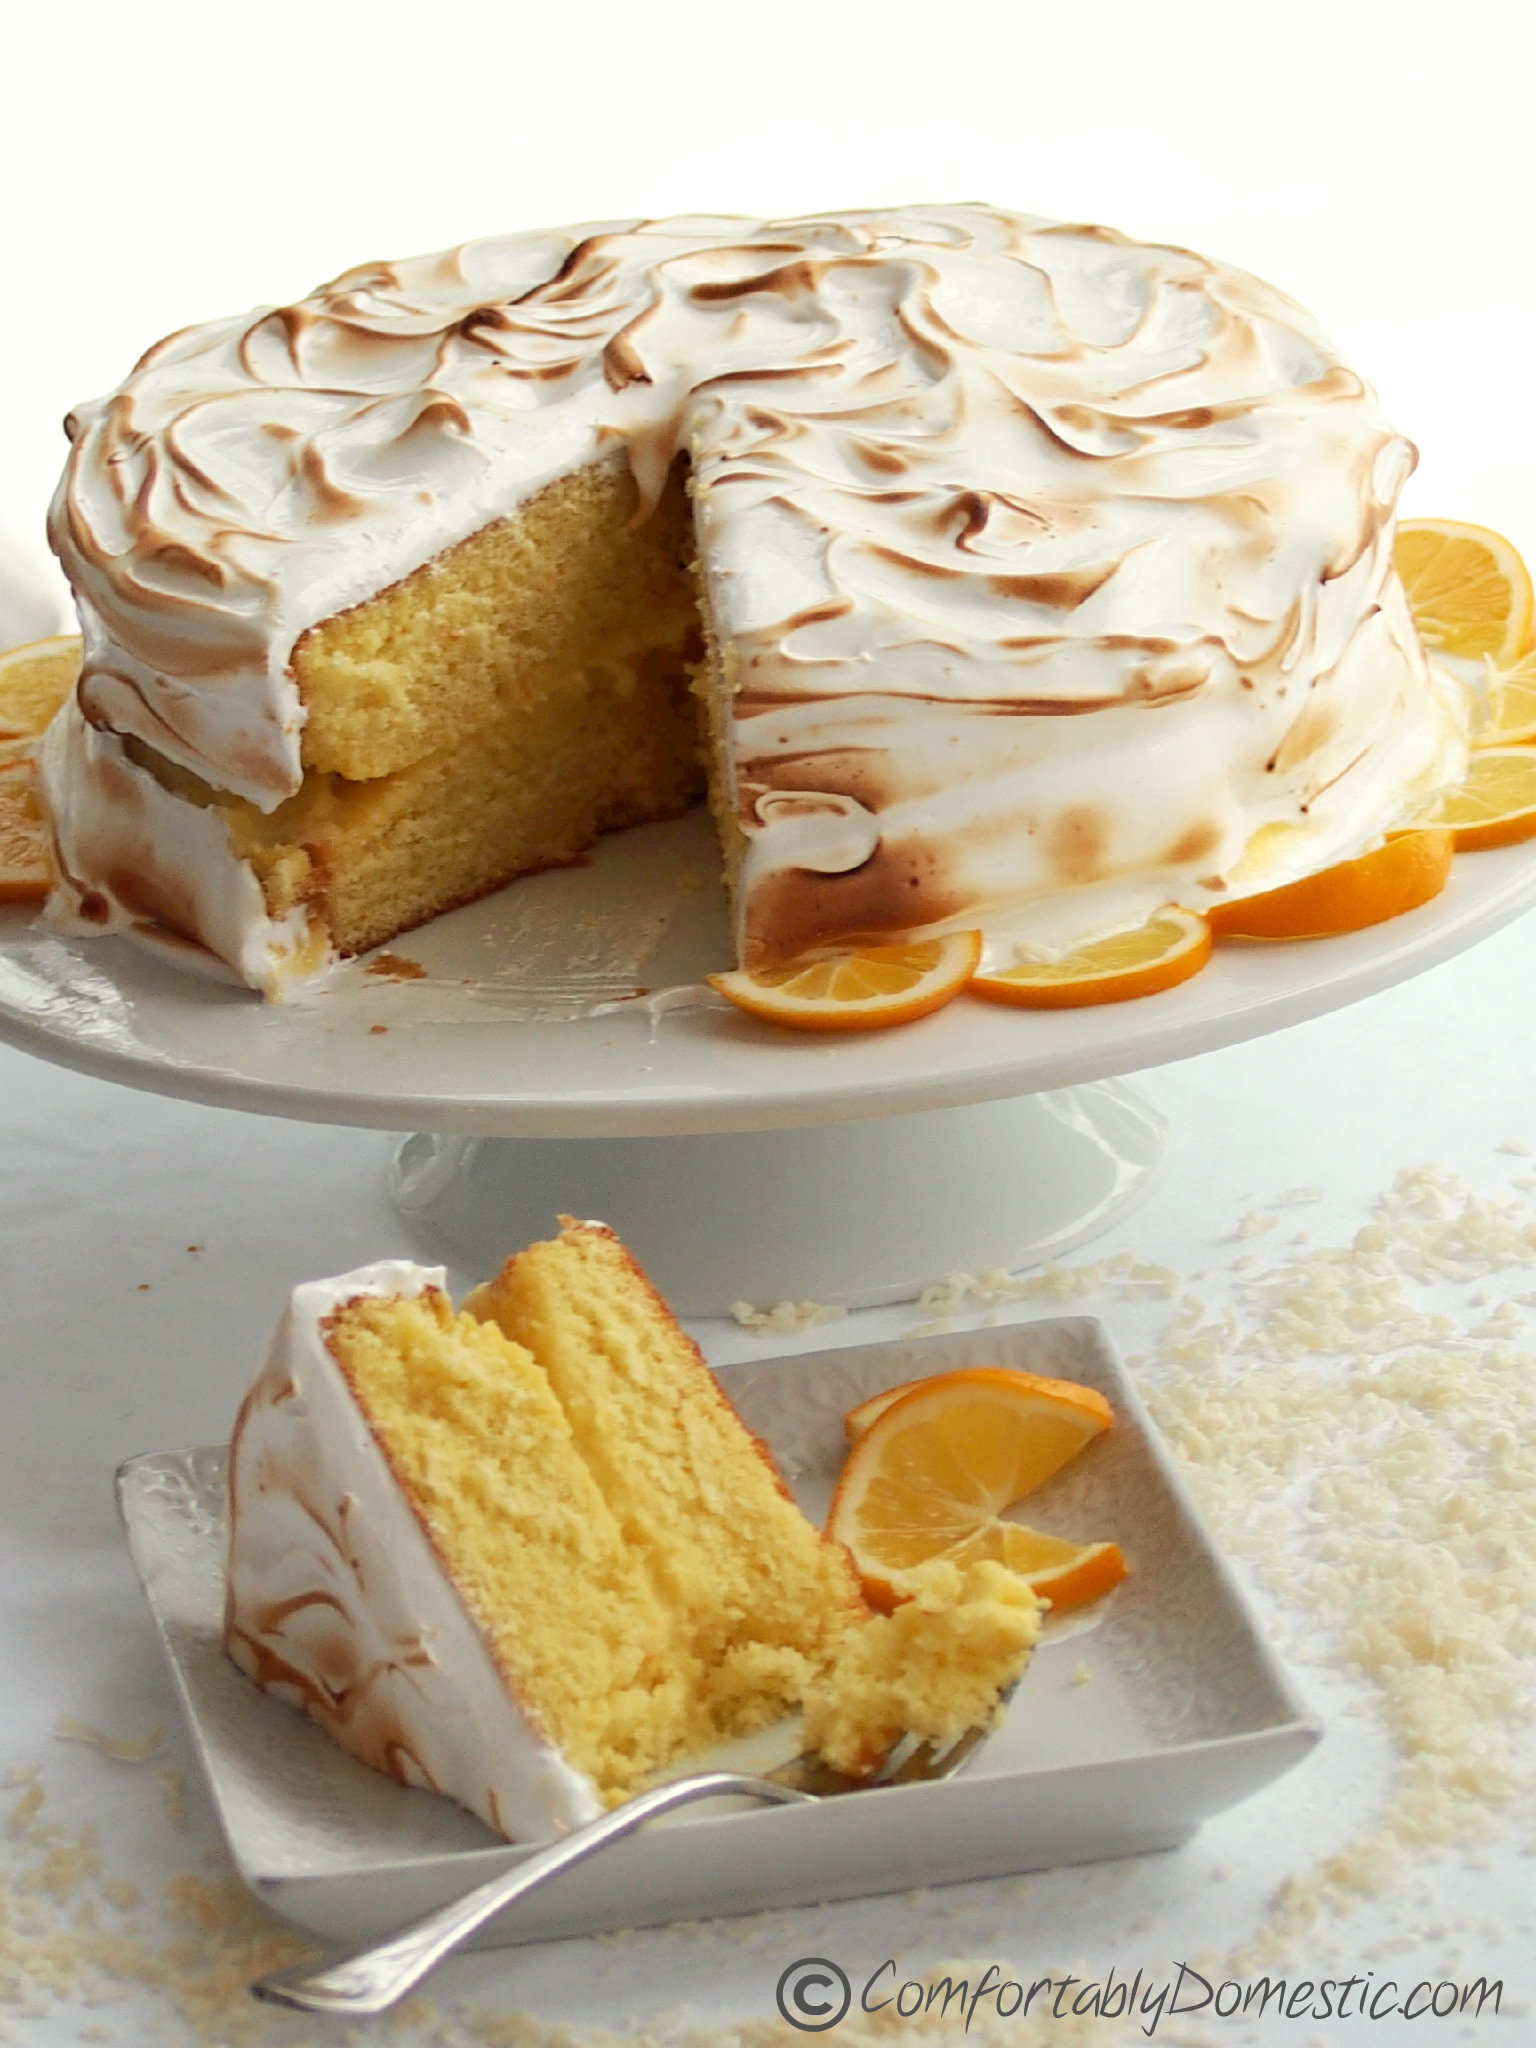 Coconut Meyer Lemon Meringue Cake - The balance of flavors and textures between moist cake, creamy lemon curd, and toasted Swiss meringue makes this Coconut Meyer Lemon Cake recipe a winner! | ComfortablyDomestic.com